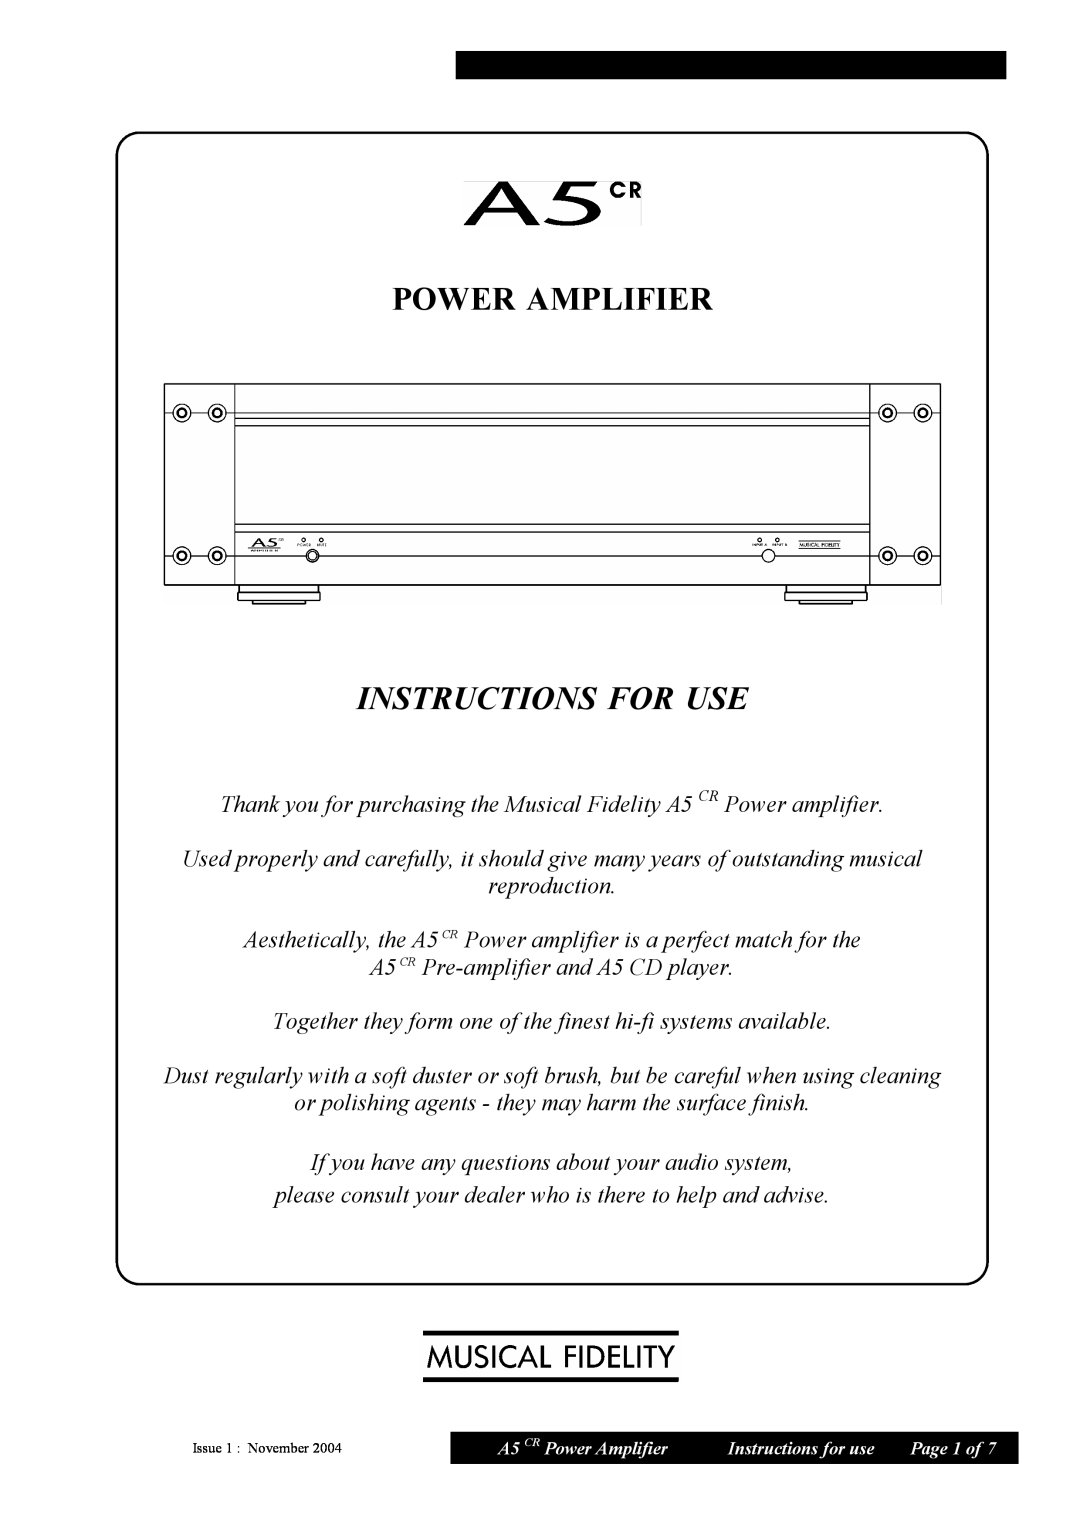 Musical Fidelity A5 CR manual Power Amplifier, Instructions For Use 